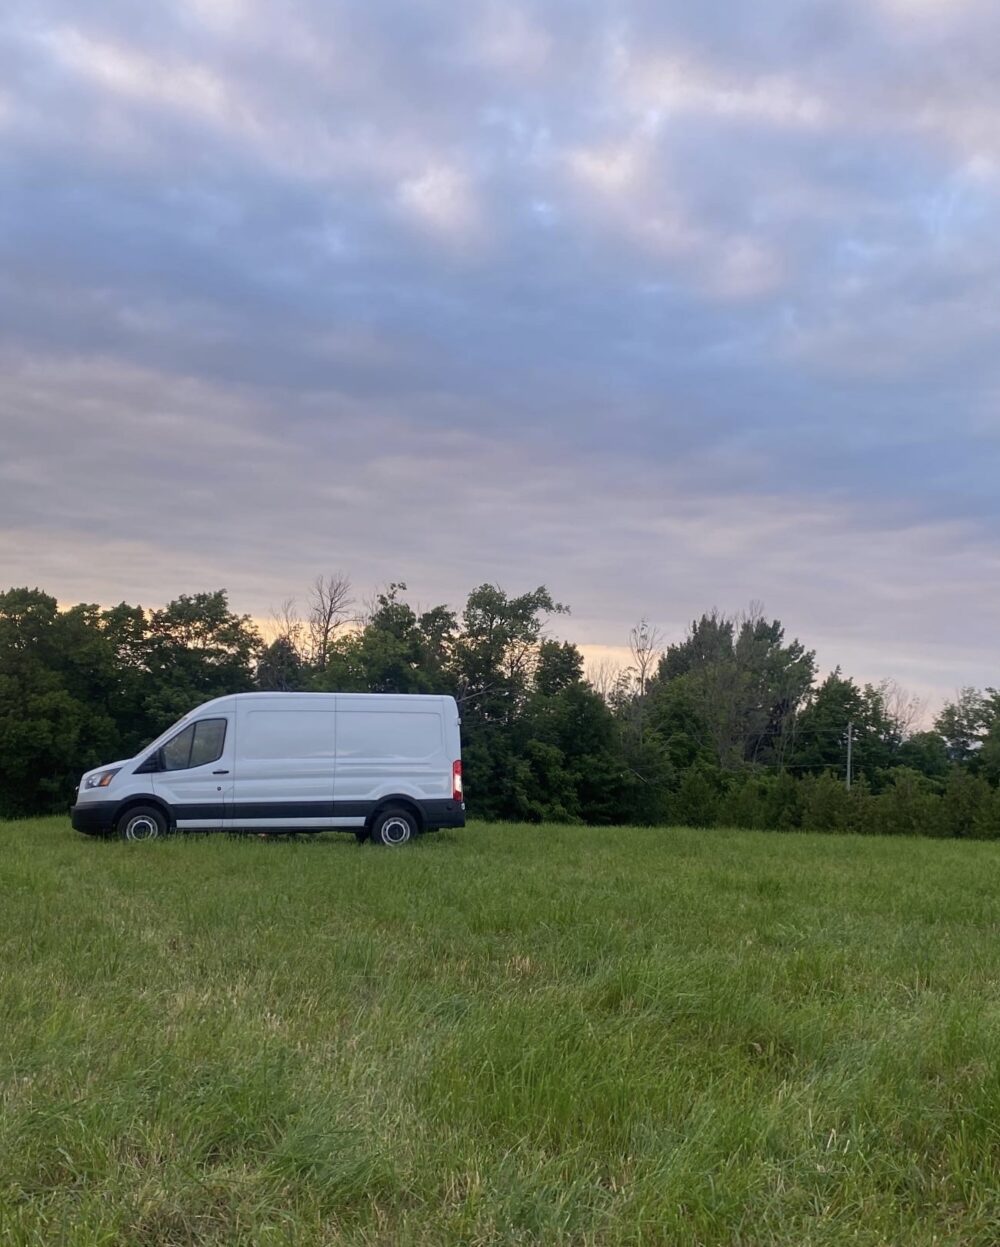 A white van is parked on a grassy field with a background of trees under a cloudy sky. The image captures the serene outdoor setting with the vehicle positioned to the left side of the frame.